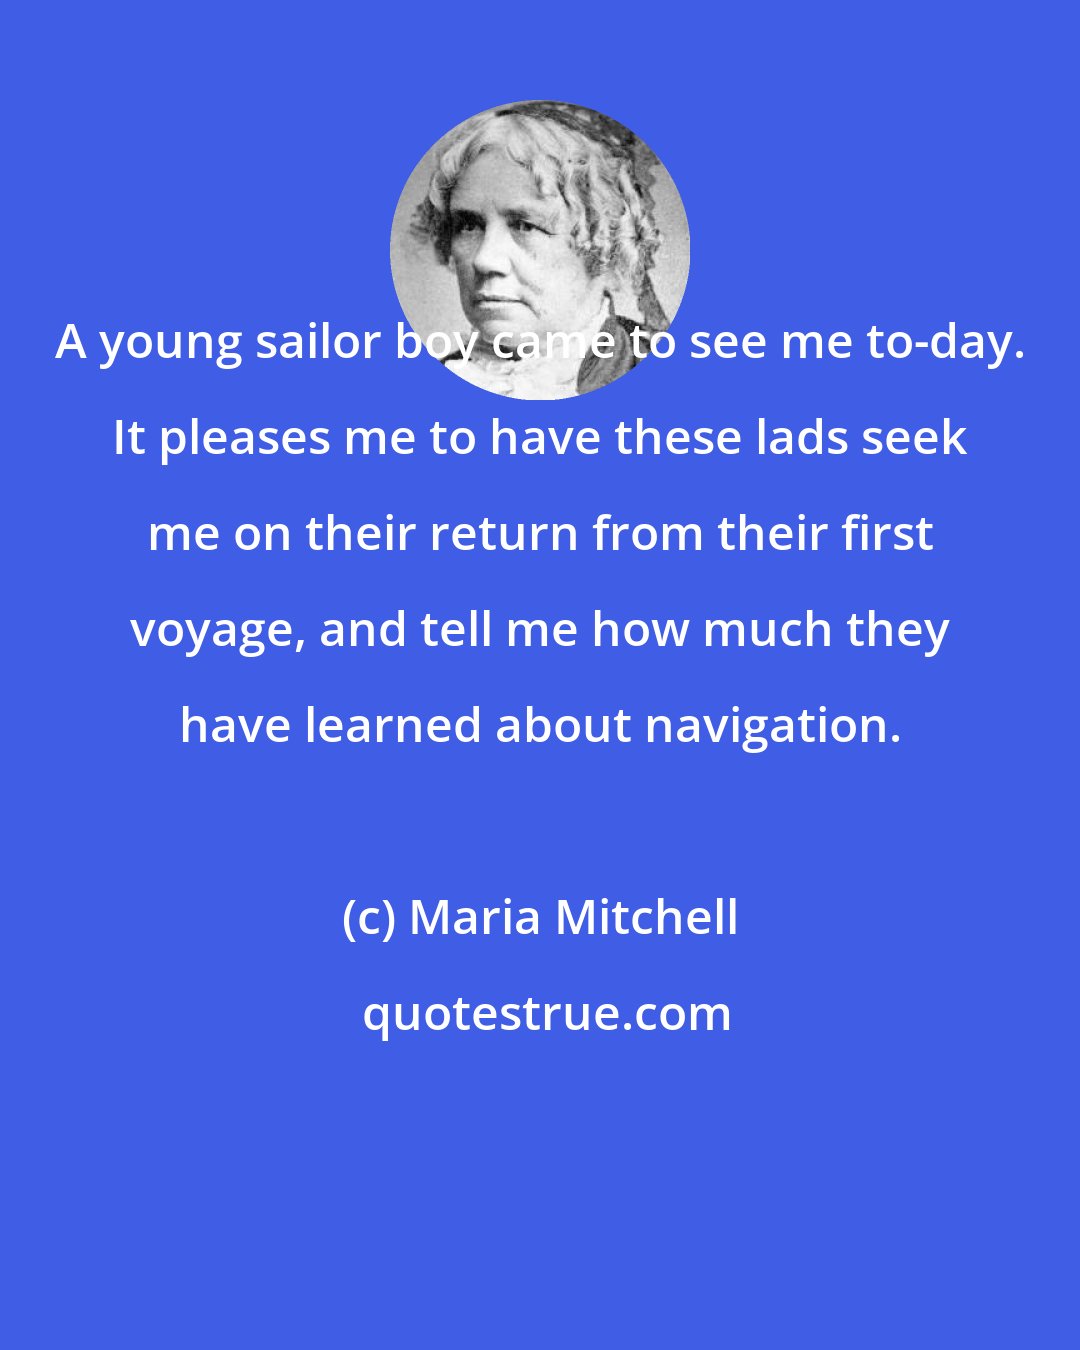 Maria Mitchell: A young sailor boy came to see me to-day. It pleases me to have these lads seek me on their return from their first voyage, and tell me how much they have learned about navigation.